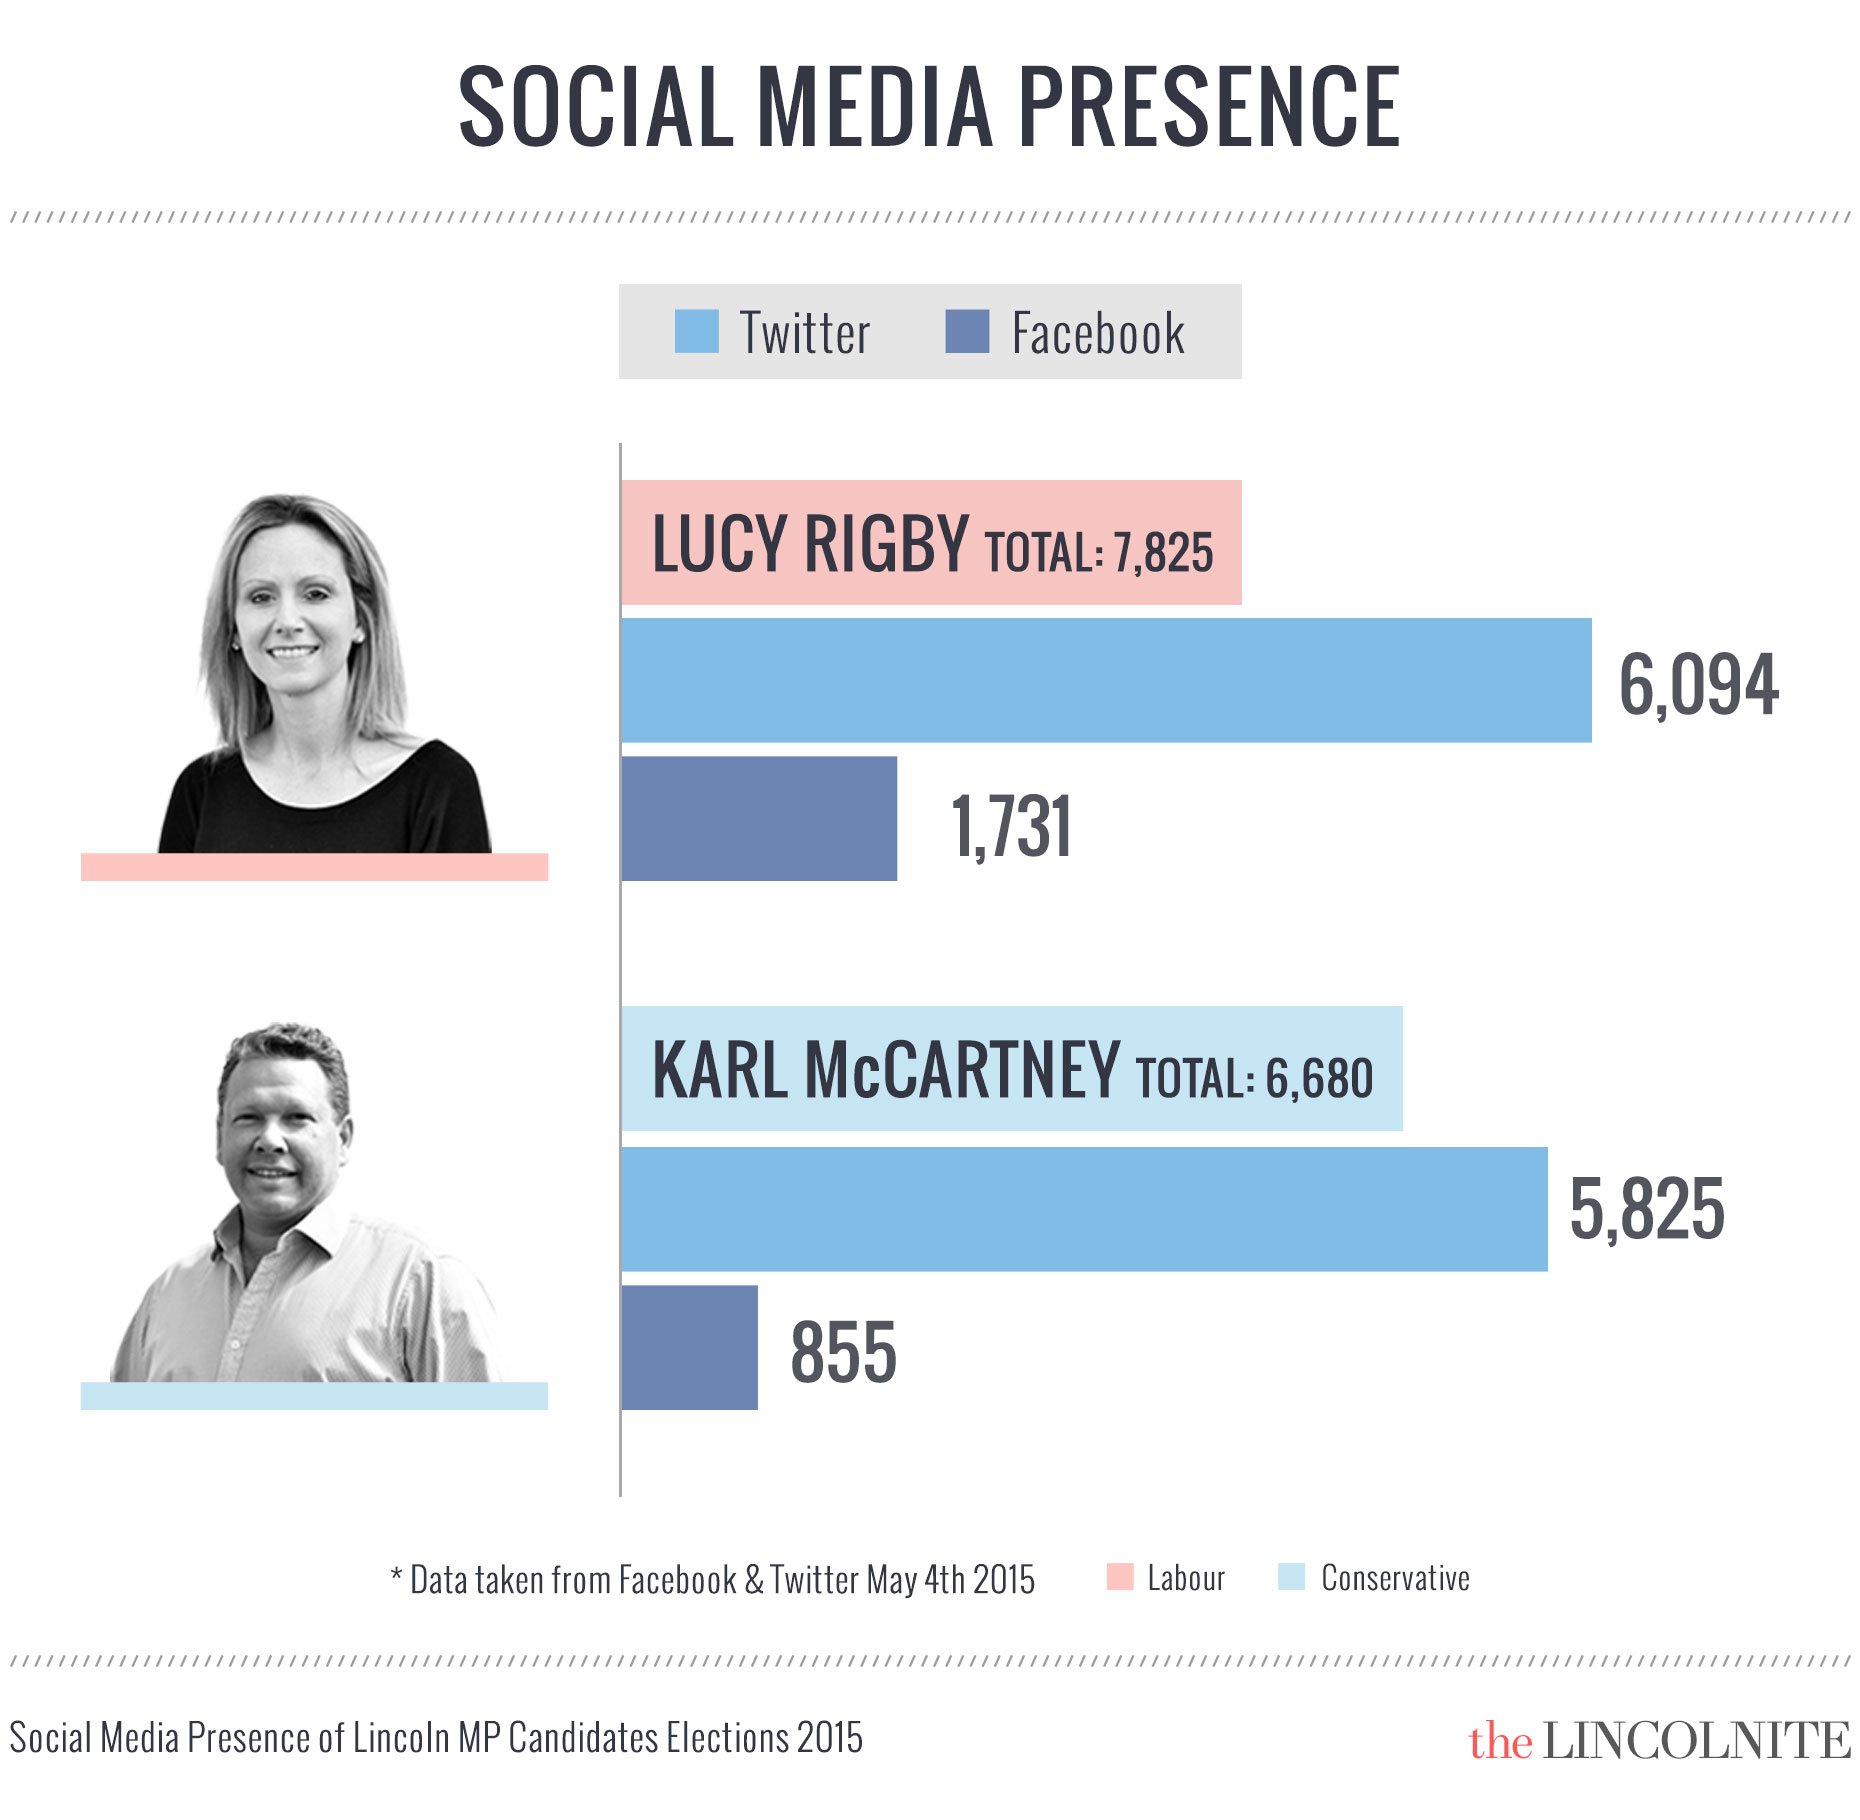 A closer look at the top two social media players. (Click to enlarge)